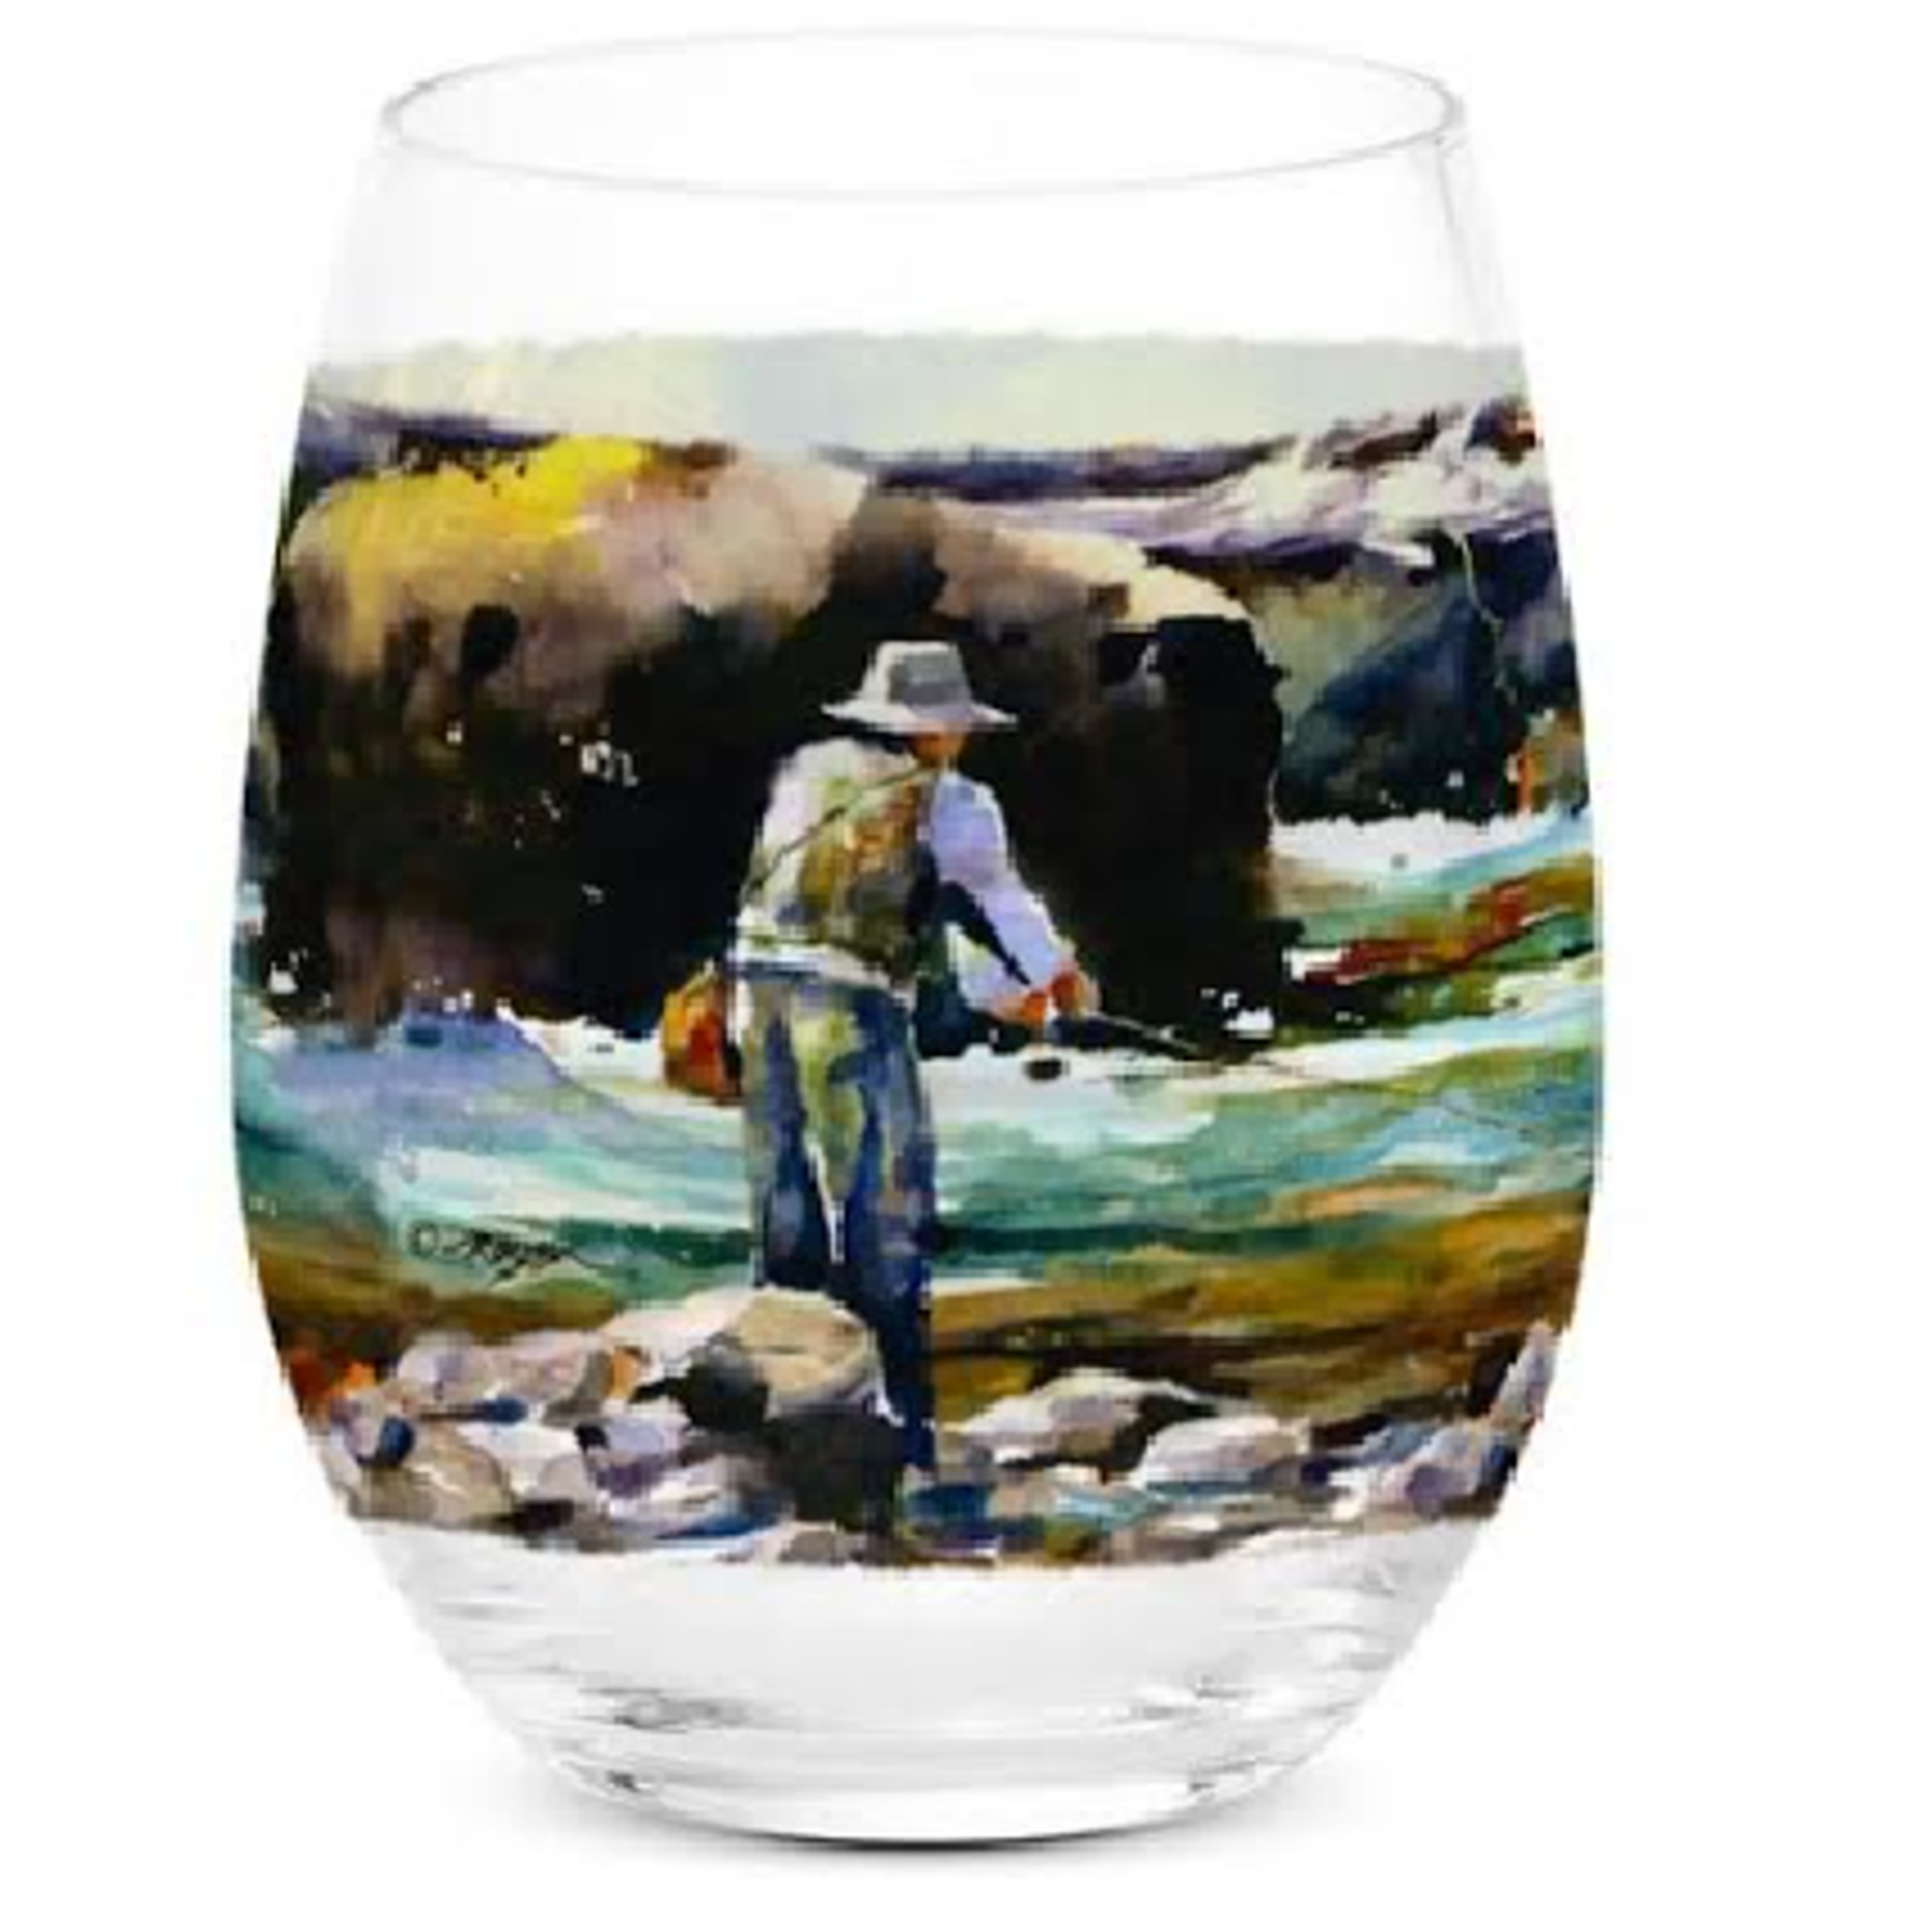 https://cdn11.bigcommerce.com/s-ob7m2s98/images/stencil/2000x2000/products/19988/73433/fly_fisherman_stemless__07840.1674783579.png?c=2